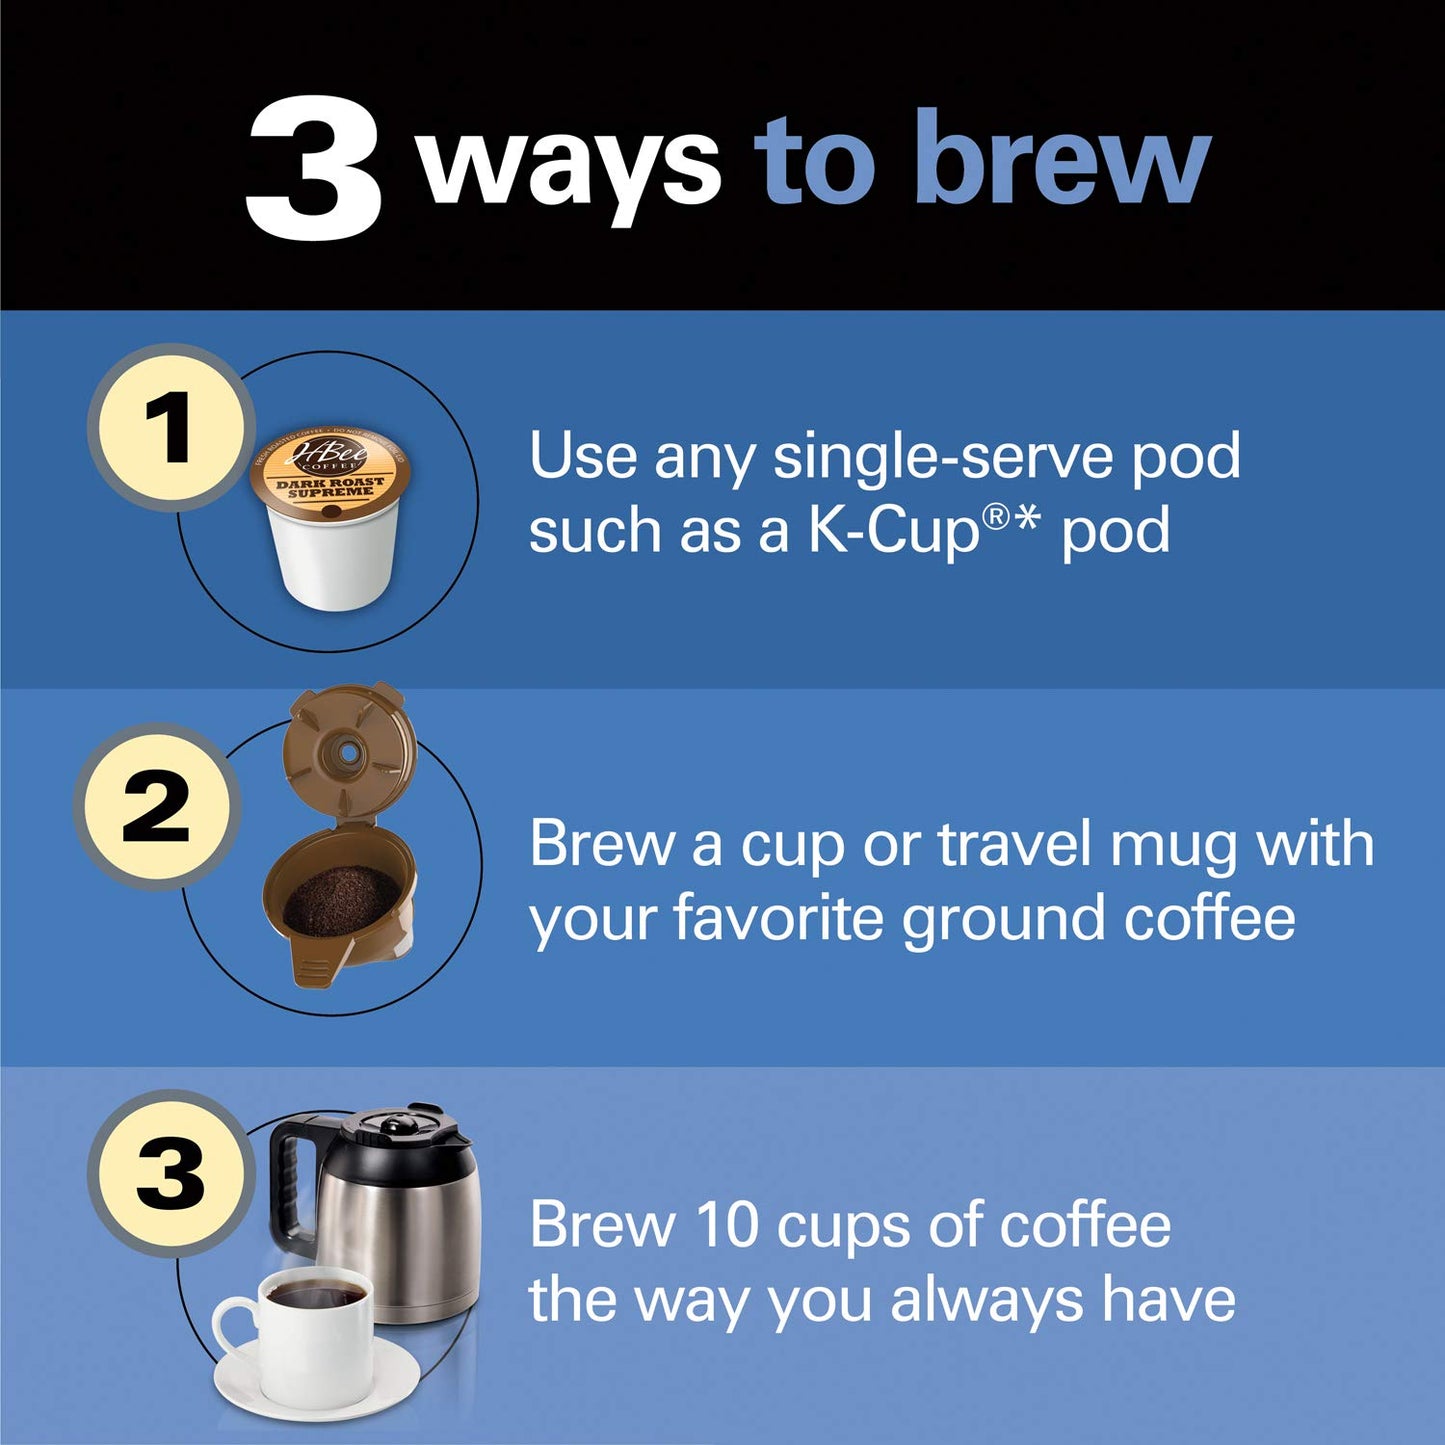 Hamilton Beach FlexBrew Trio 2-Way Coffee Maker, Compatible with K-Cup Pods or Grounds, Combo, Single Serve & Full 10c Thermal Pot, Black and Stainless